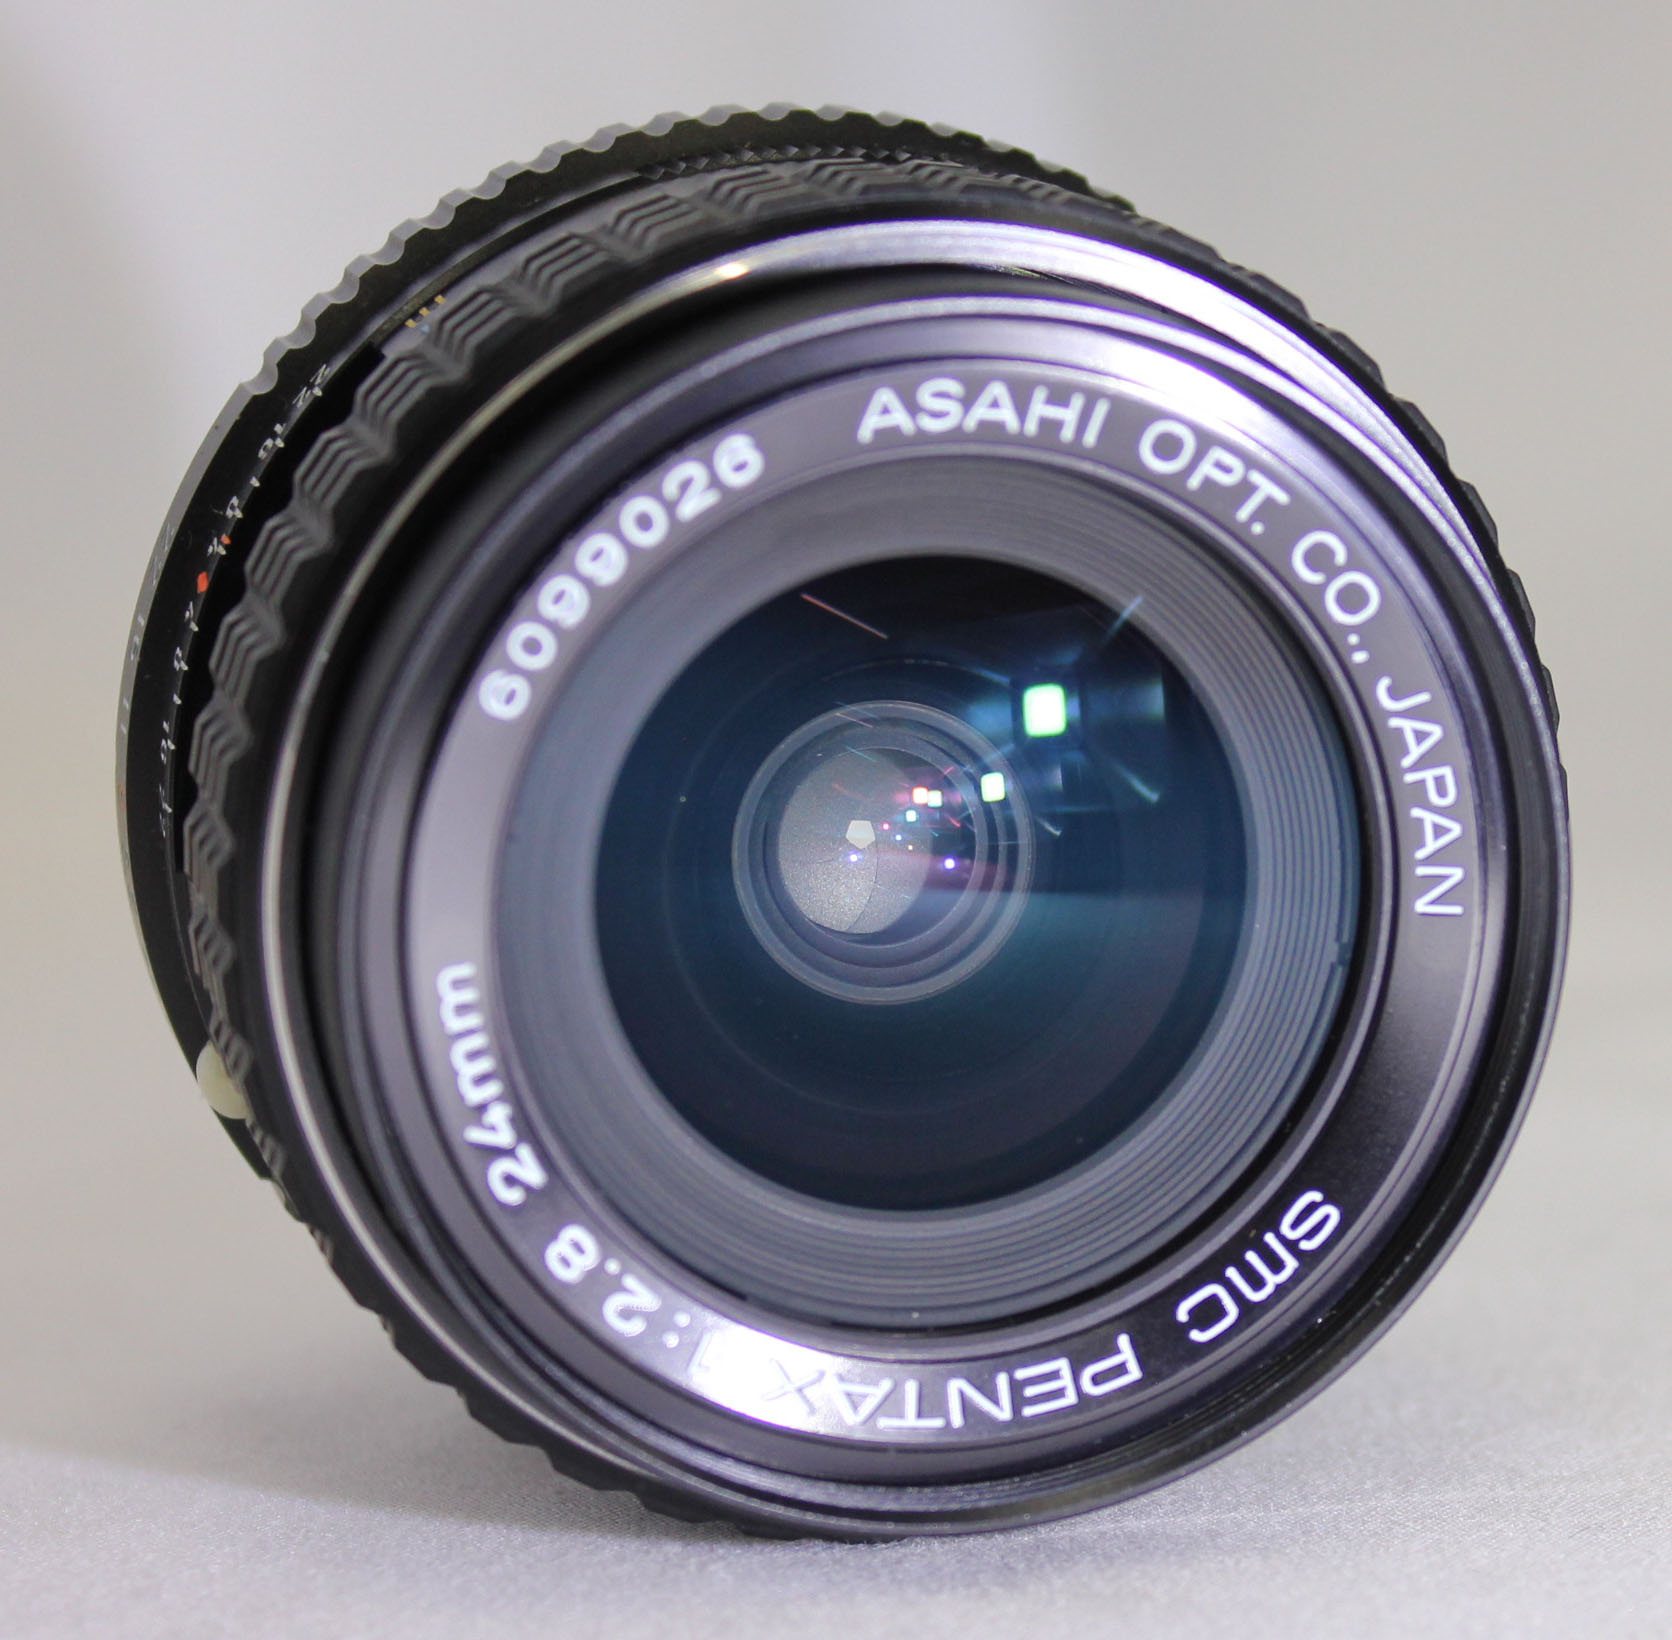 SMC Pentax 24mm F/2.8 MF Wide Angle K PK Mount Lens from Japan Photo 7